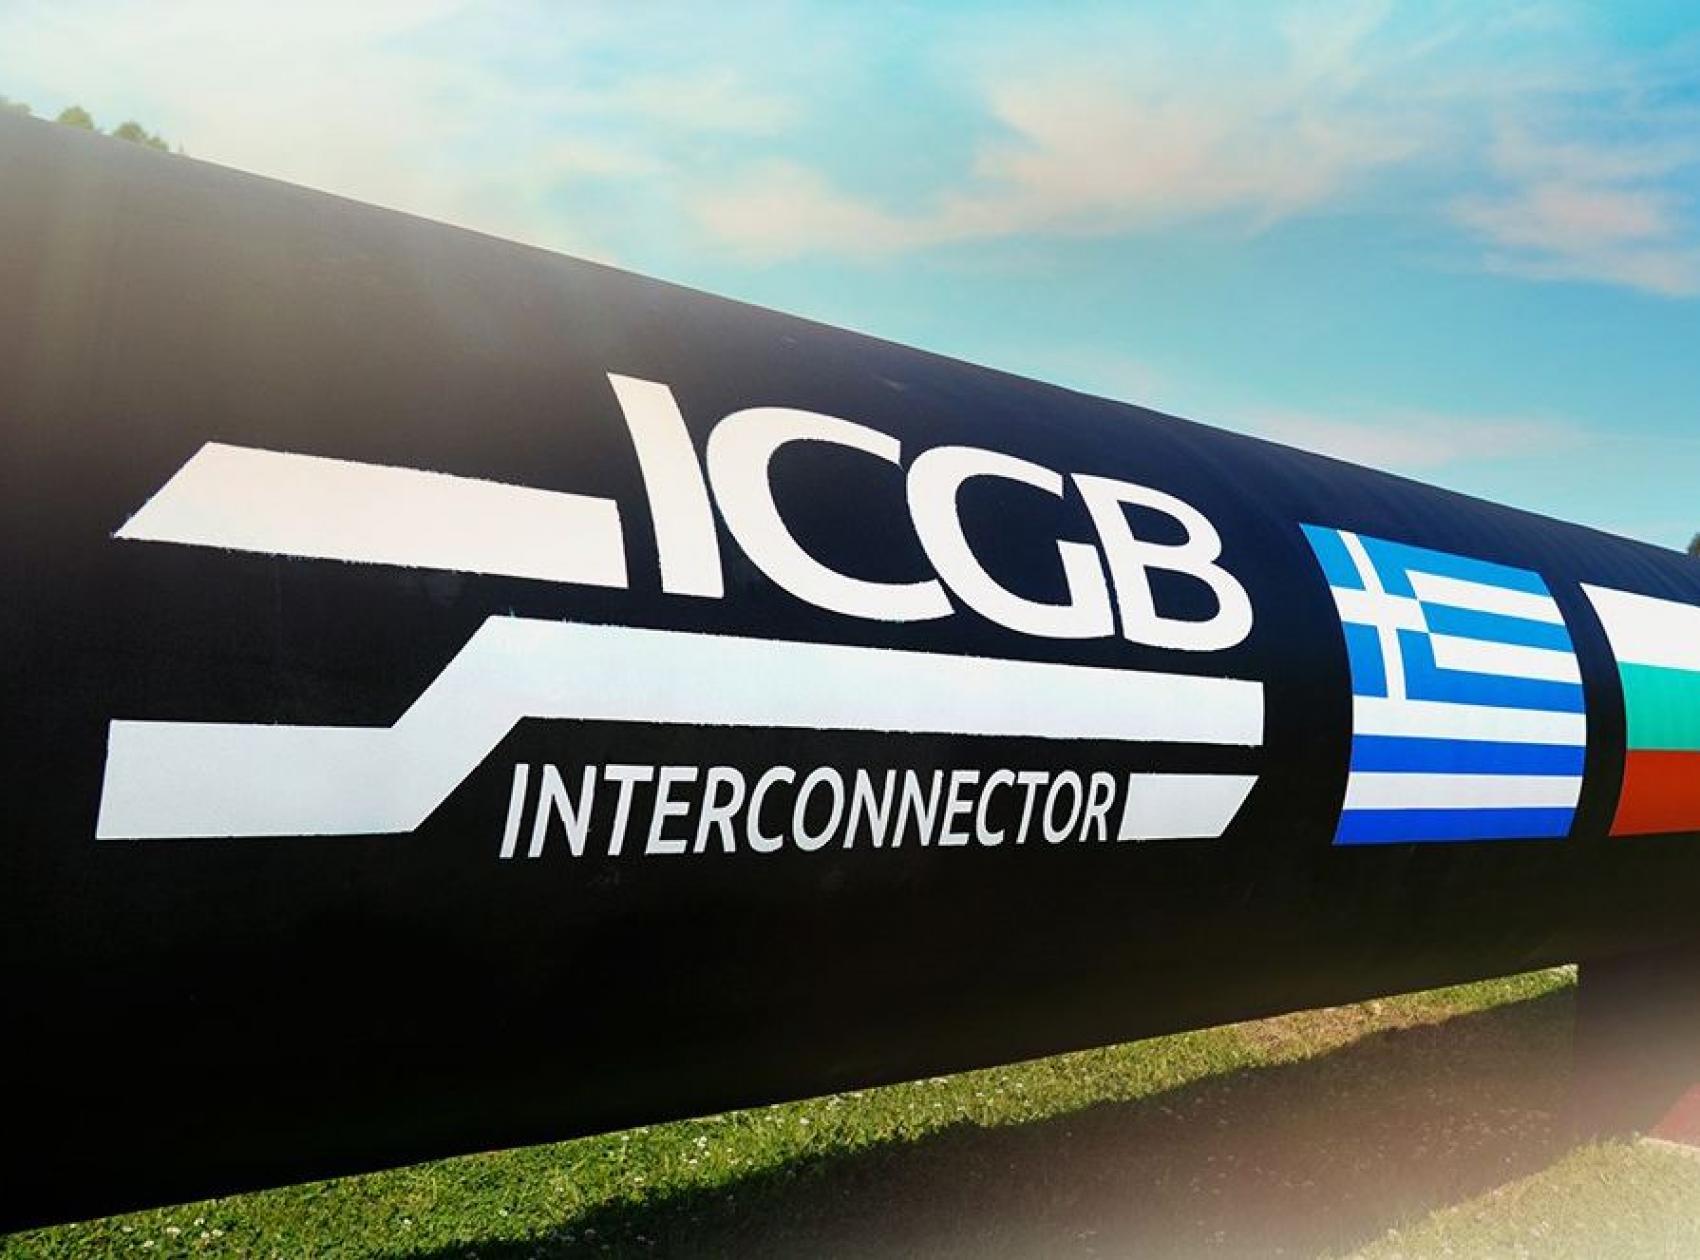 The independent transmission operator ICGB also absorbed the last tranche